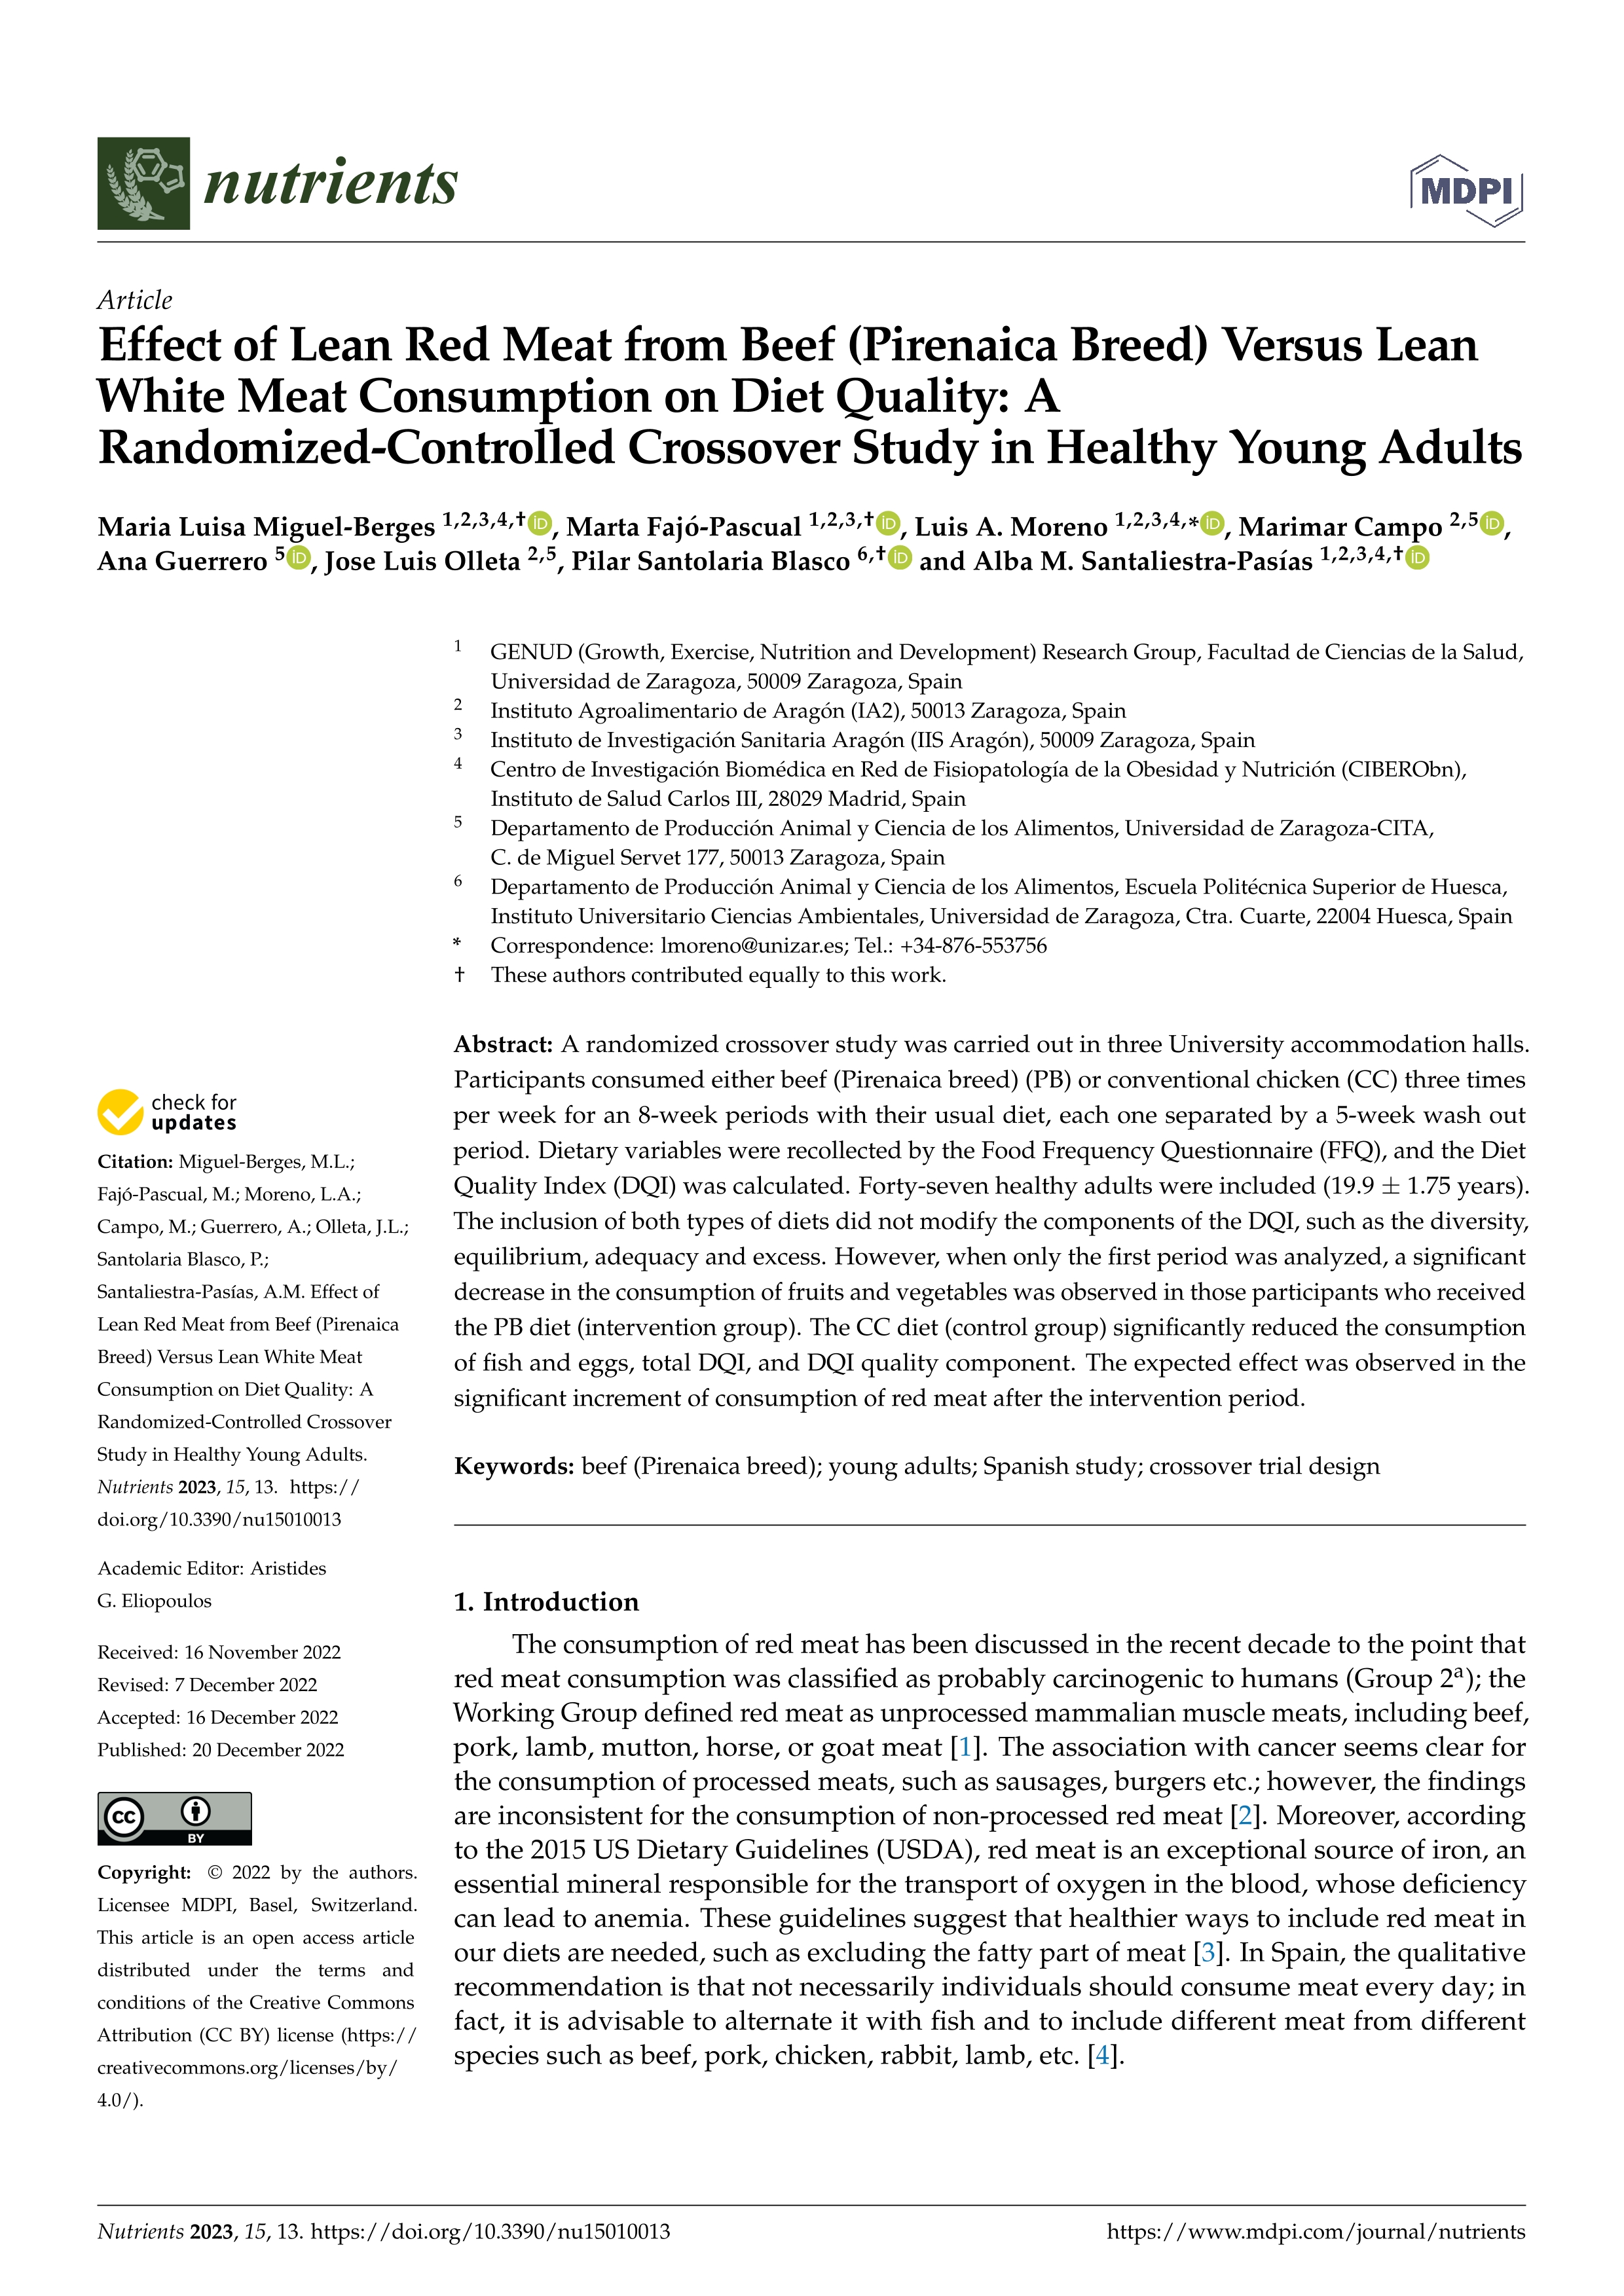 Effect of lean red meat from beef (Pirenaica breed) versus lean white meat consumption on diet quality: a randomized-controlled crossover study in healthy young adults